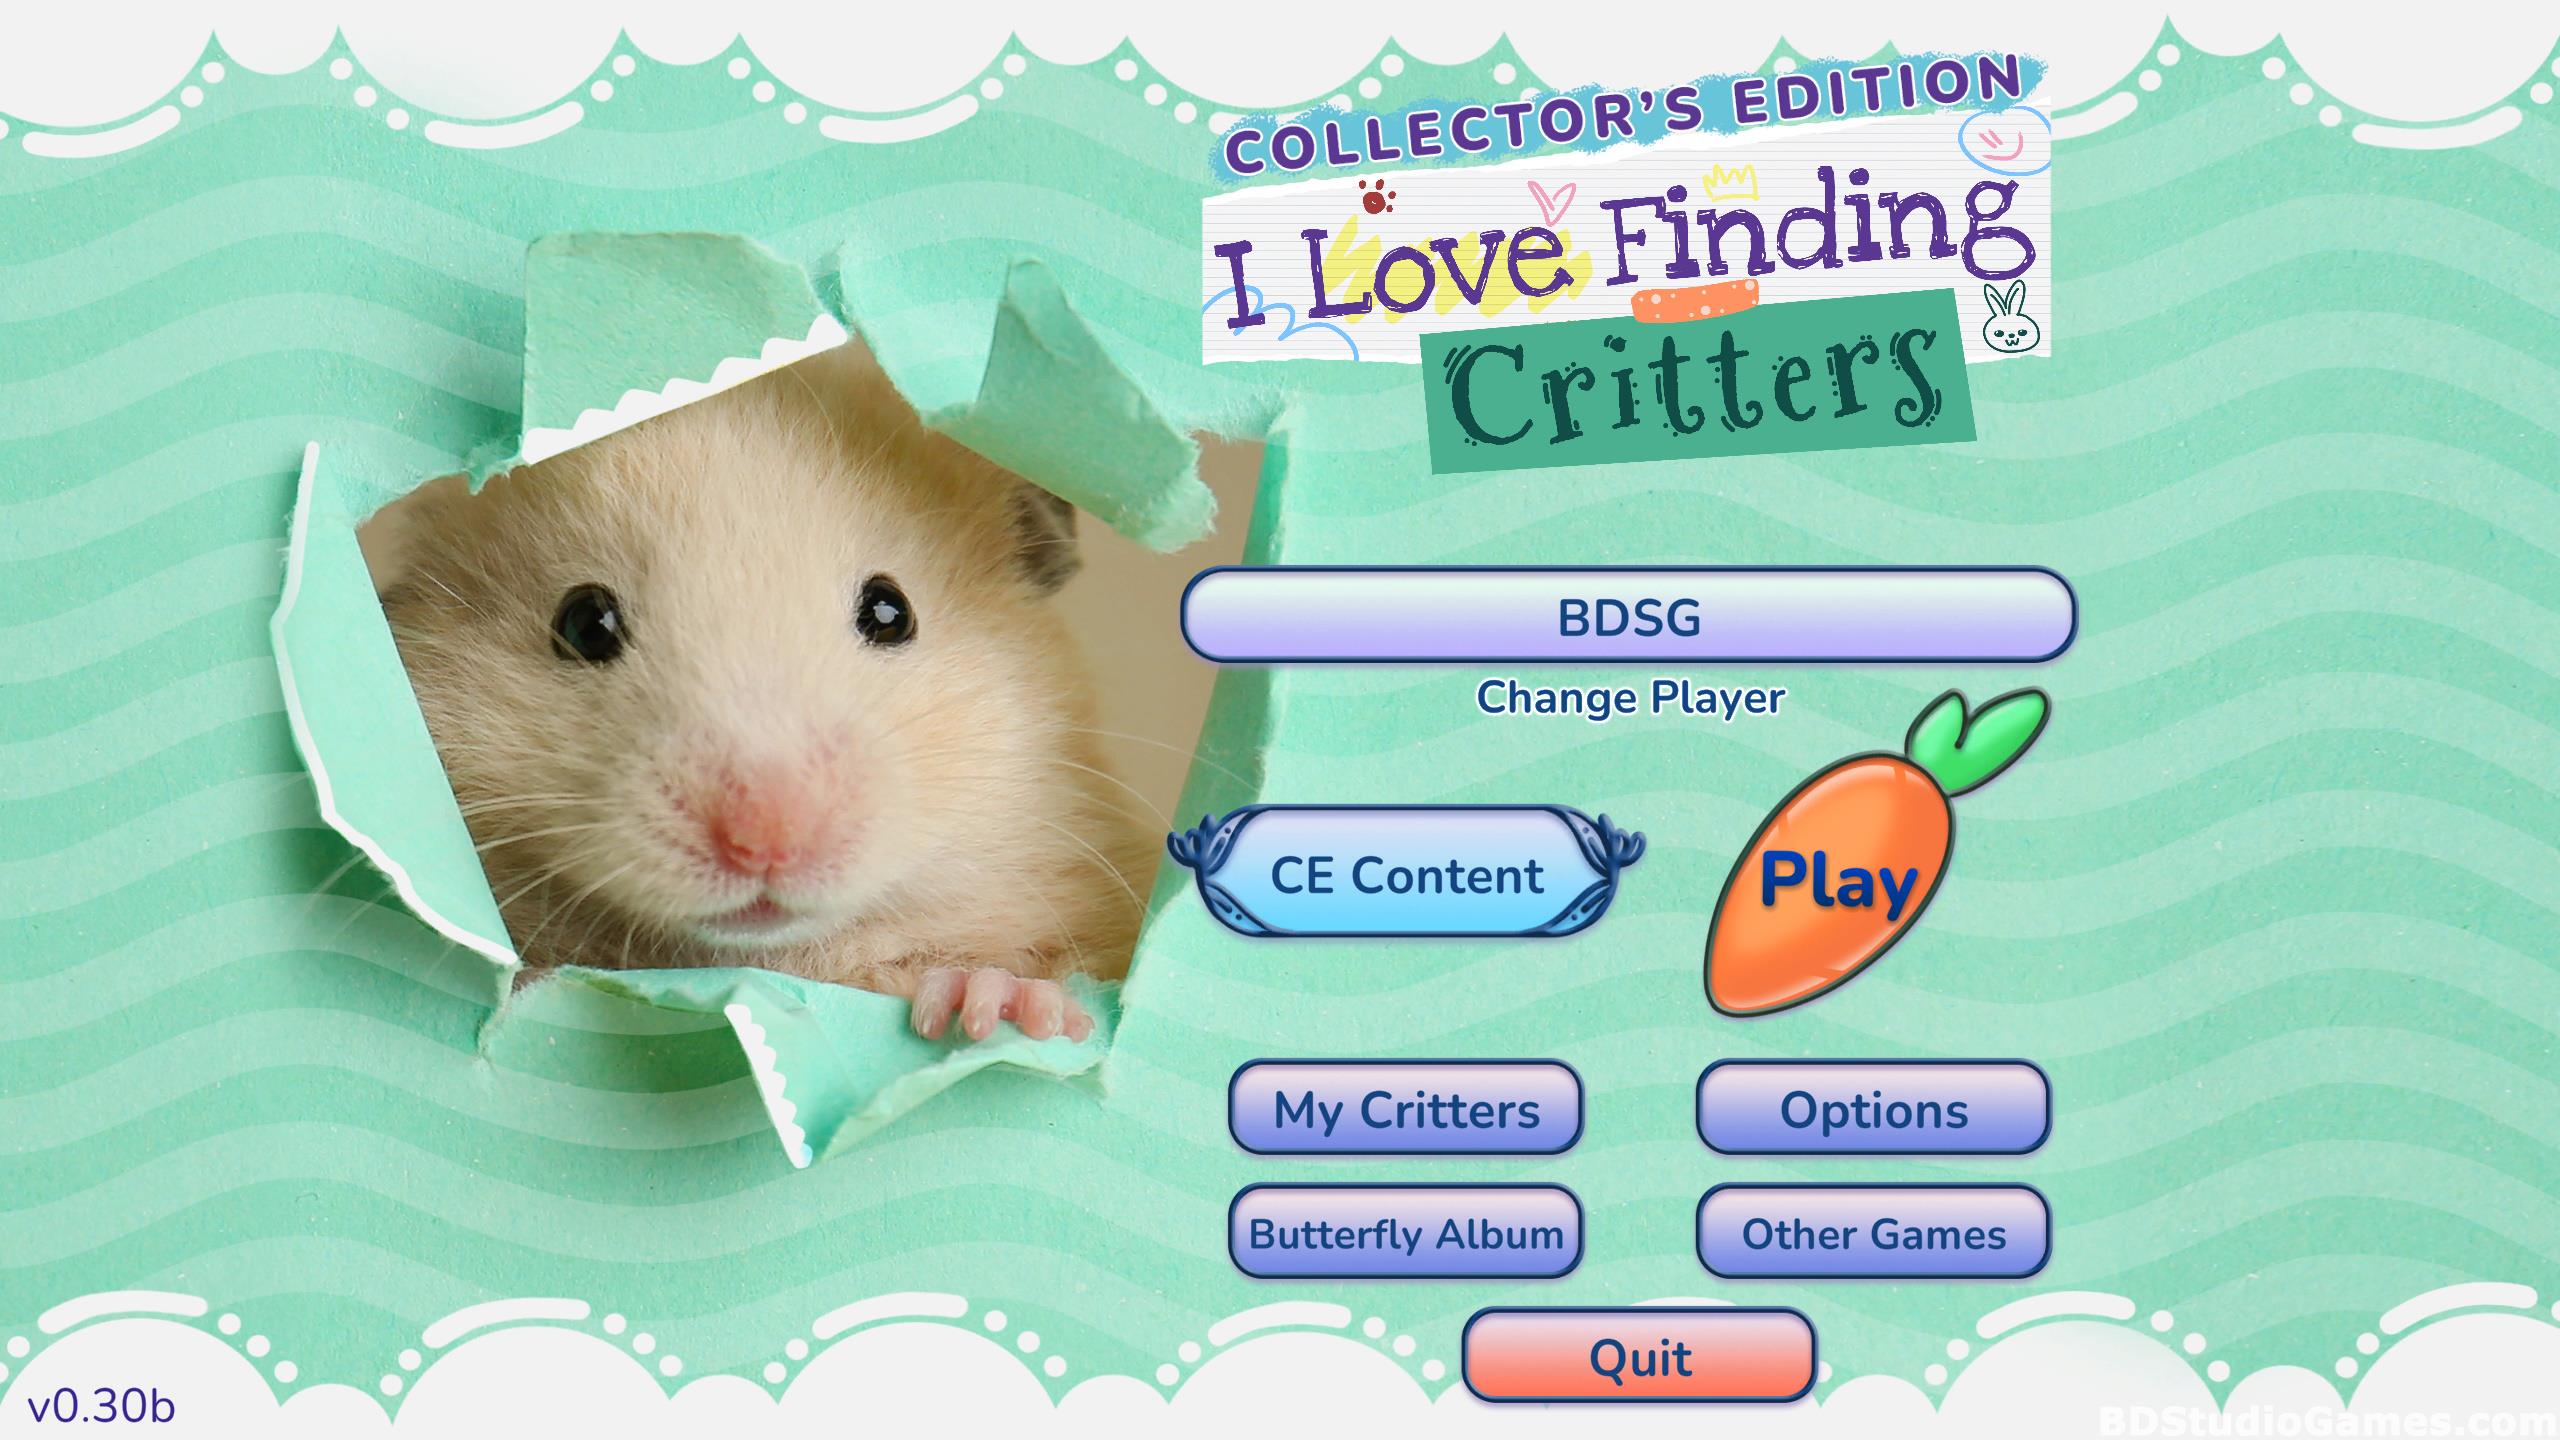 I Love Finding Critters Collector's Edition Free Download Screenshots 01